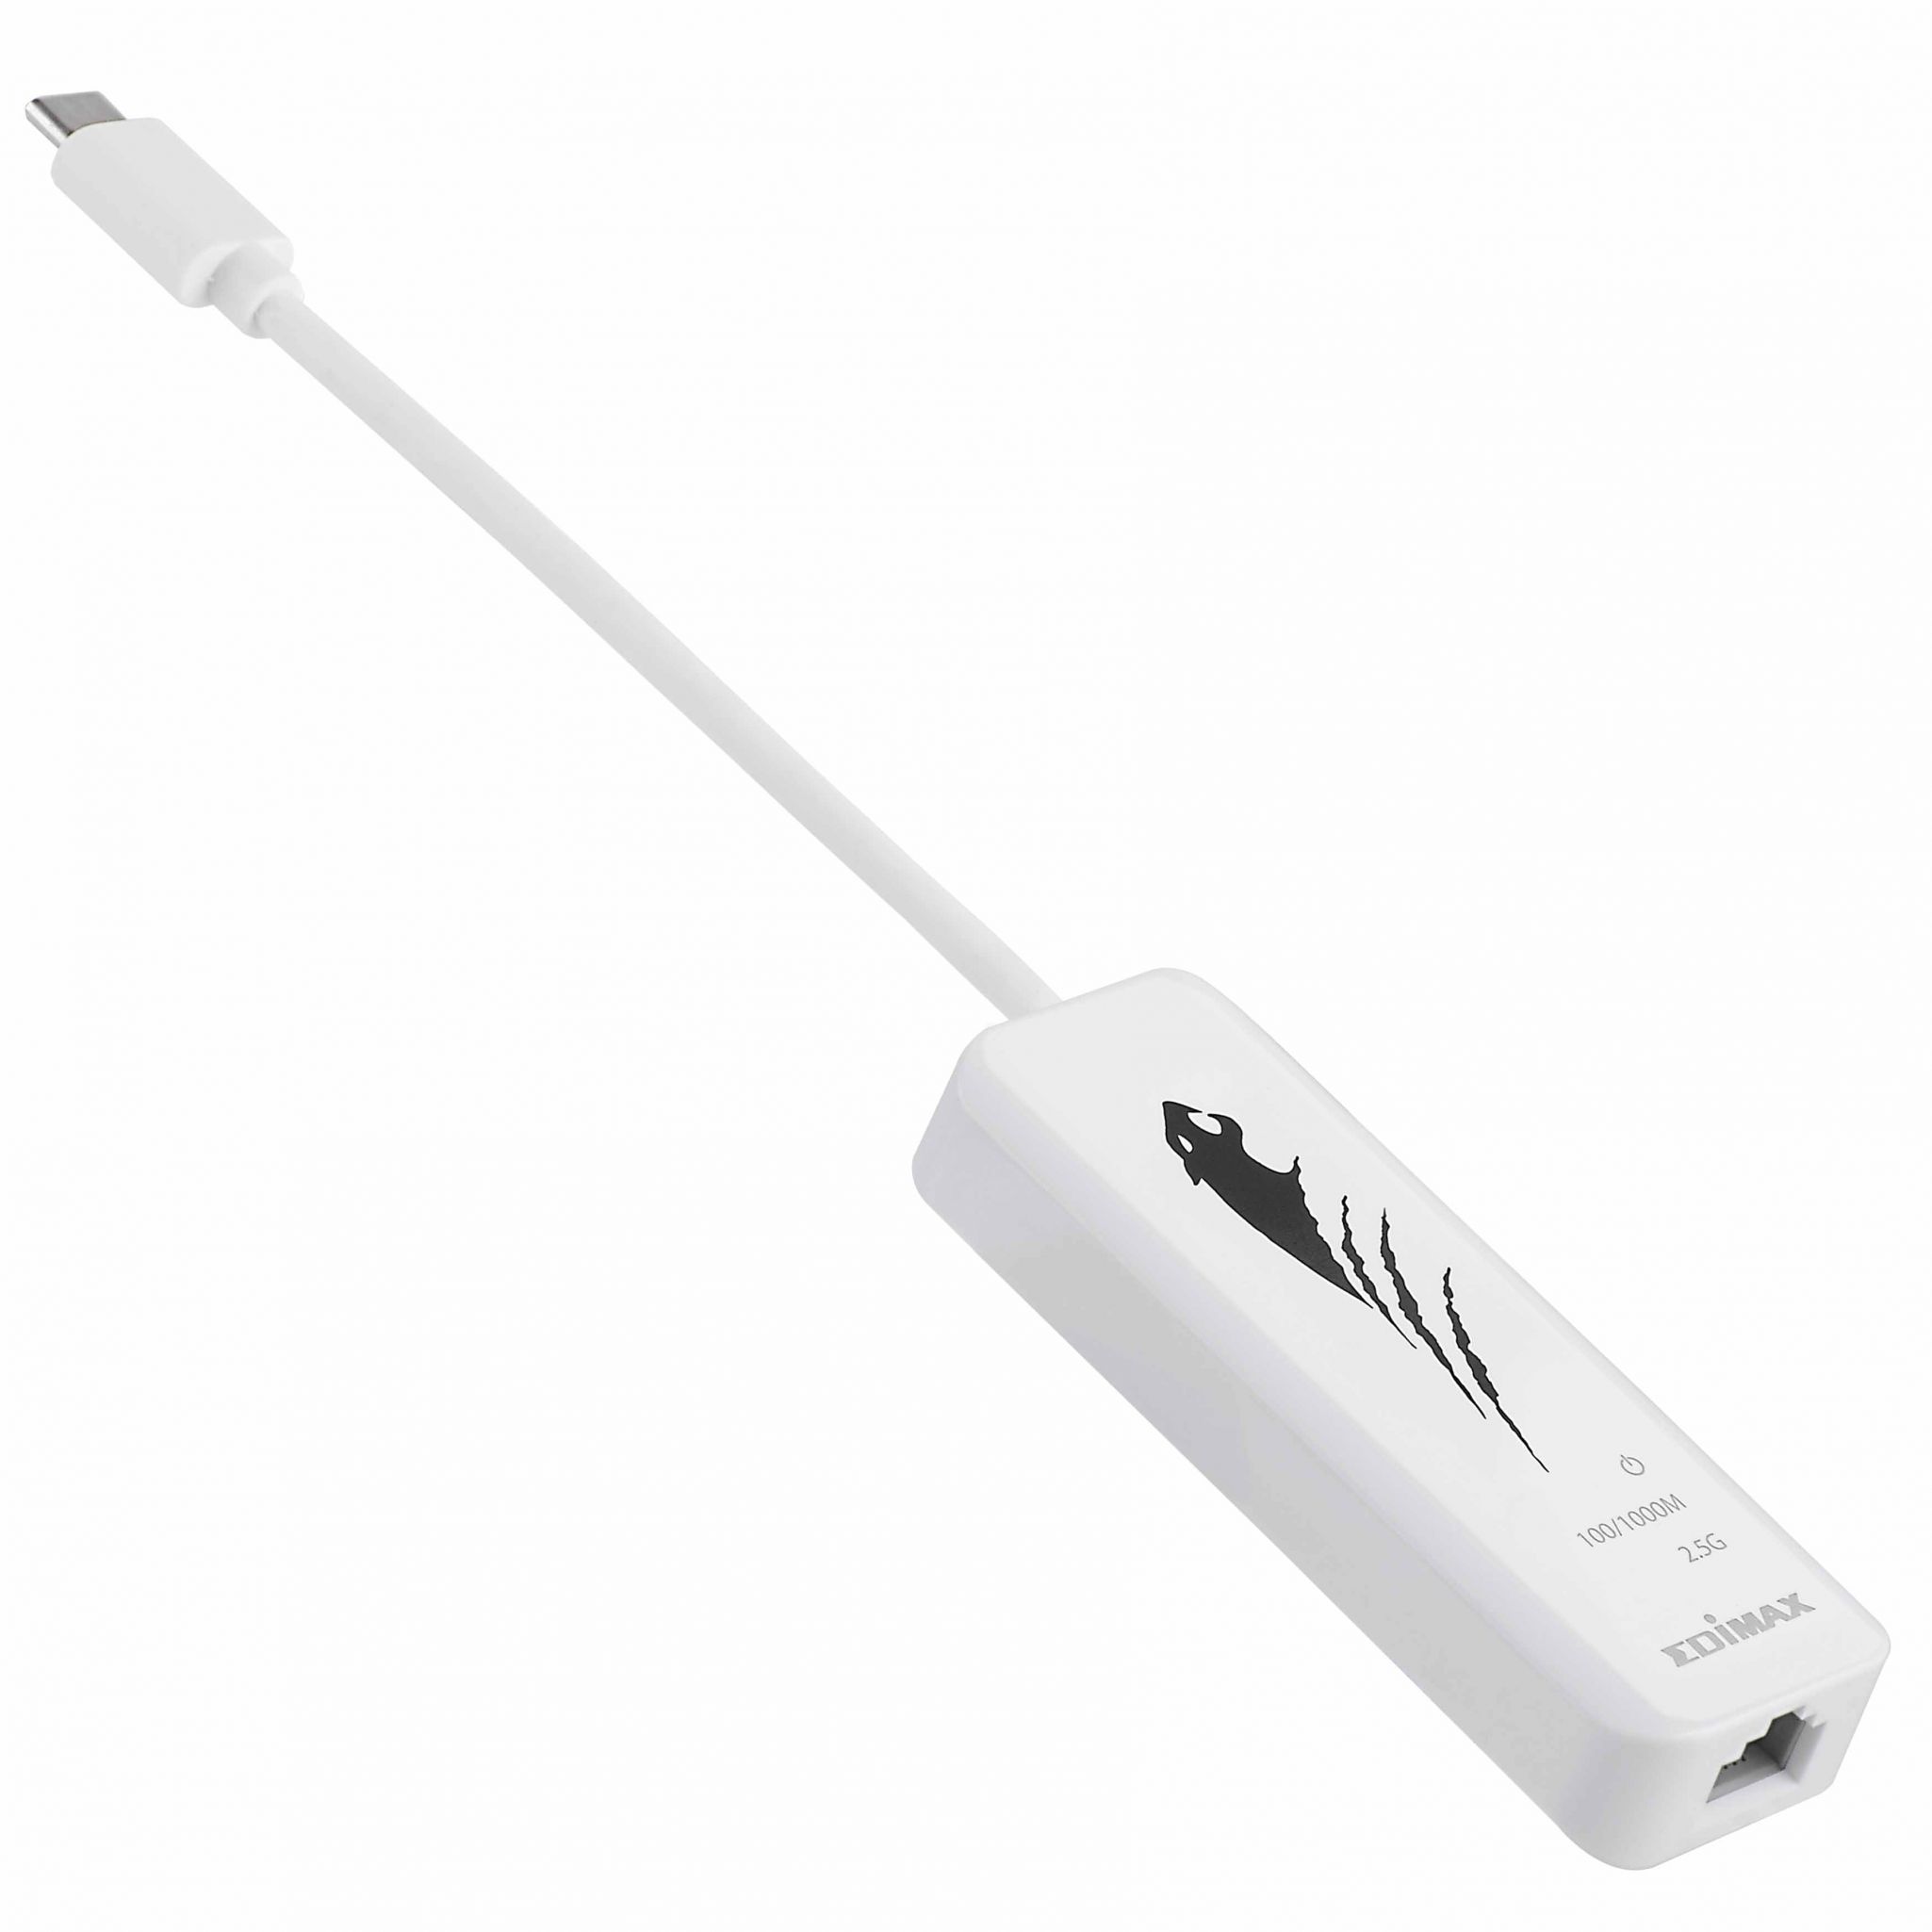 Edimax EU-4307 USB Type-C to 2.5G Gigabit Ethernet Adapter Up To 100M/1Gbps / 2.5Gbps LED Indicator Plug and Play